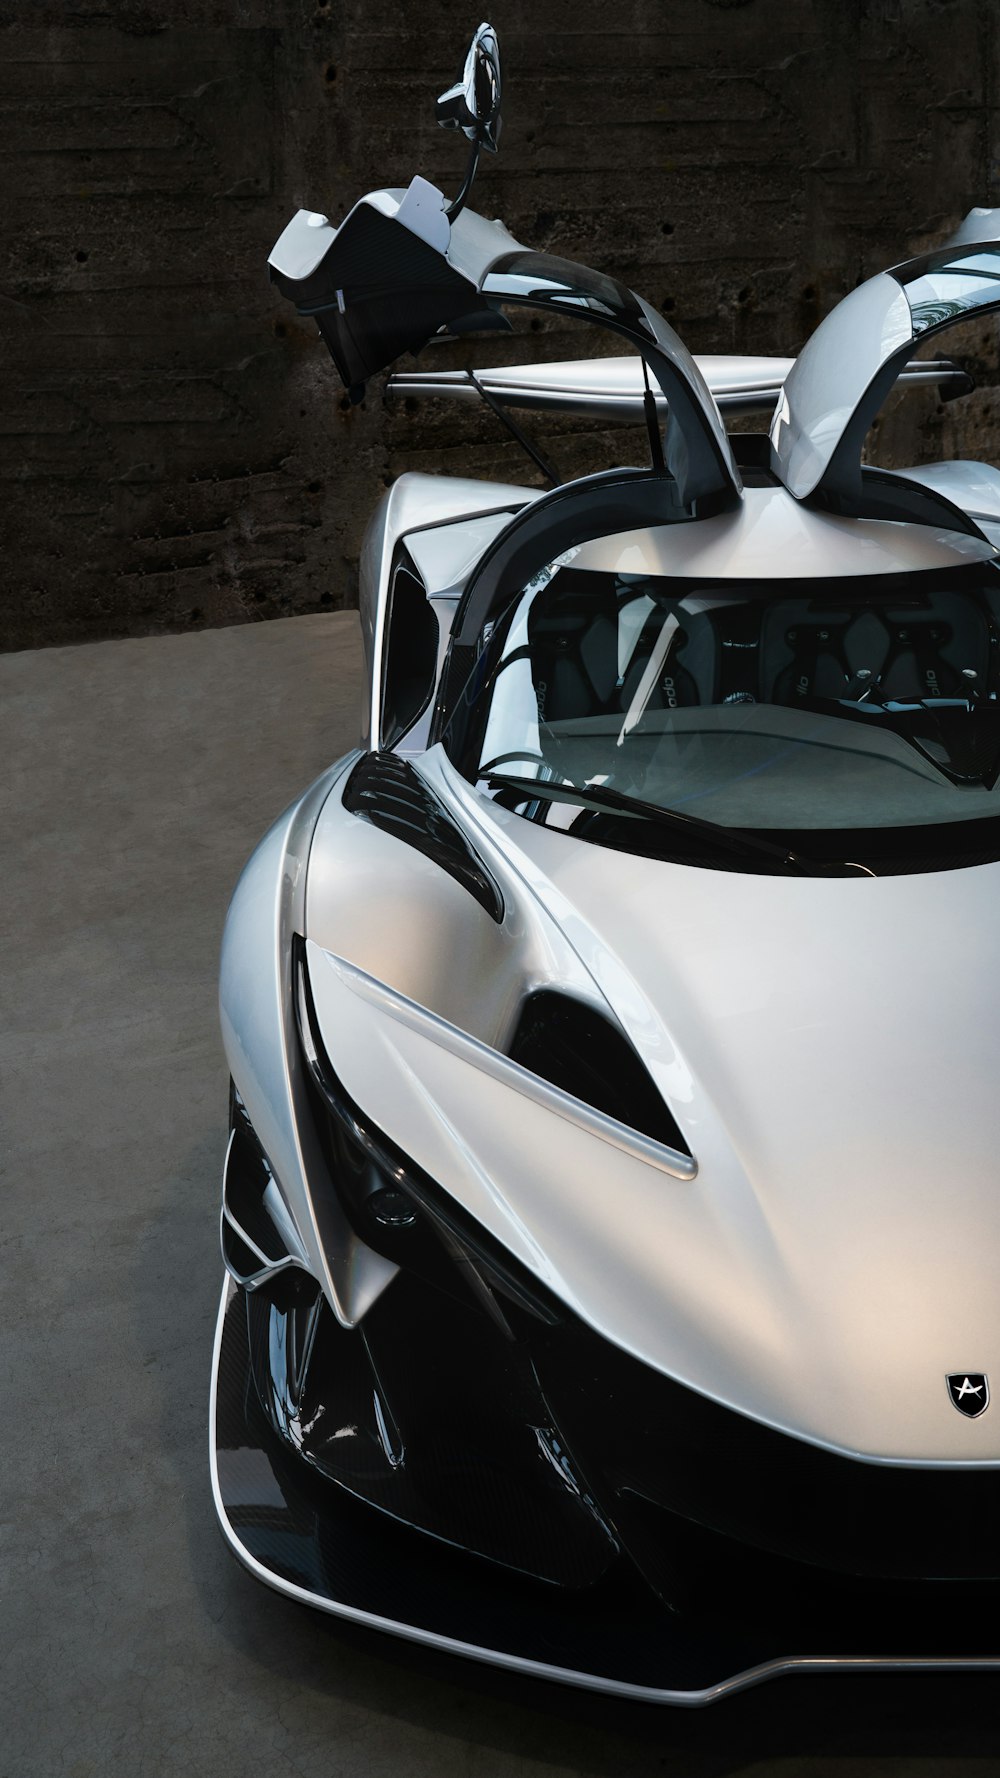 a white and black sports car parked in a garage